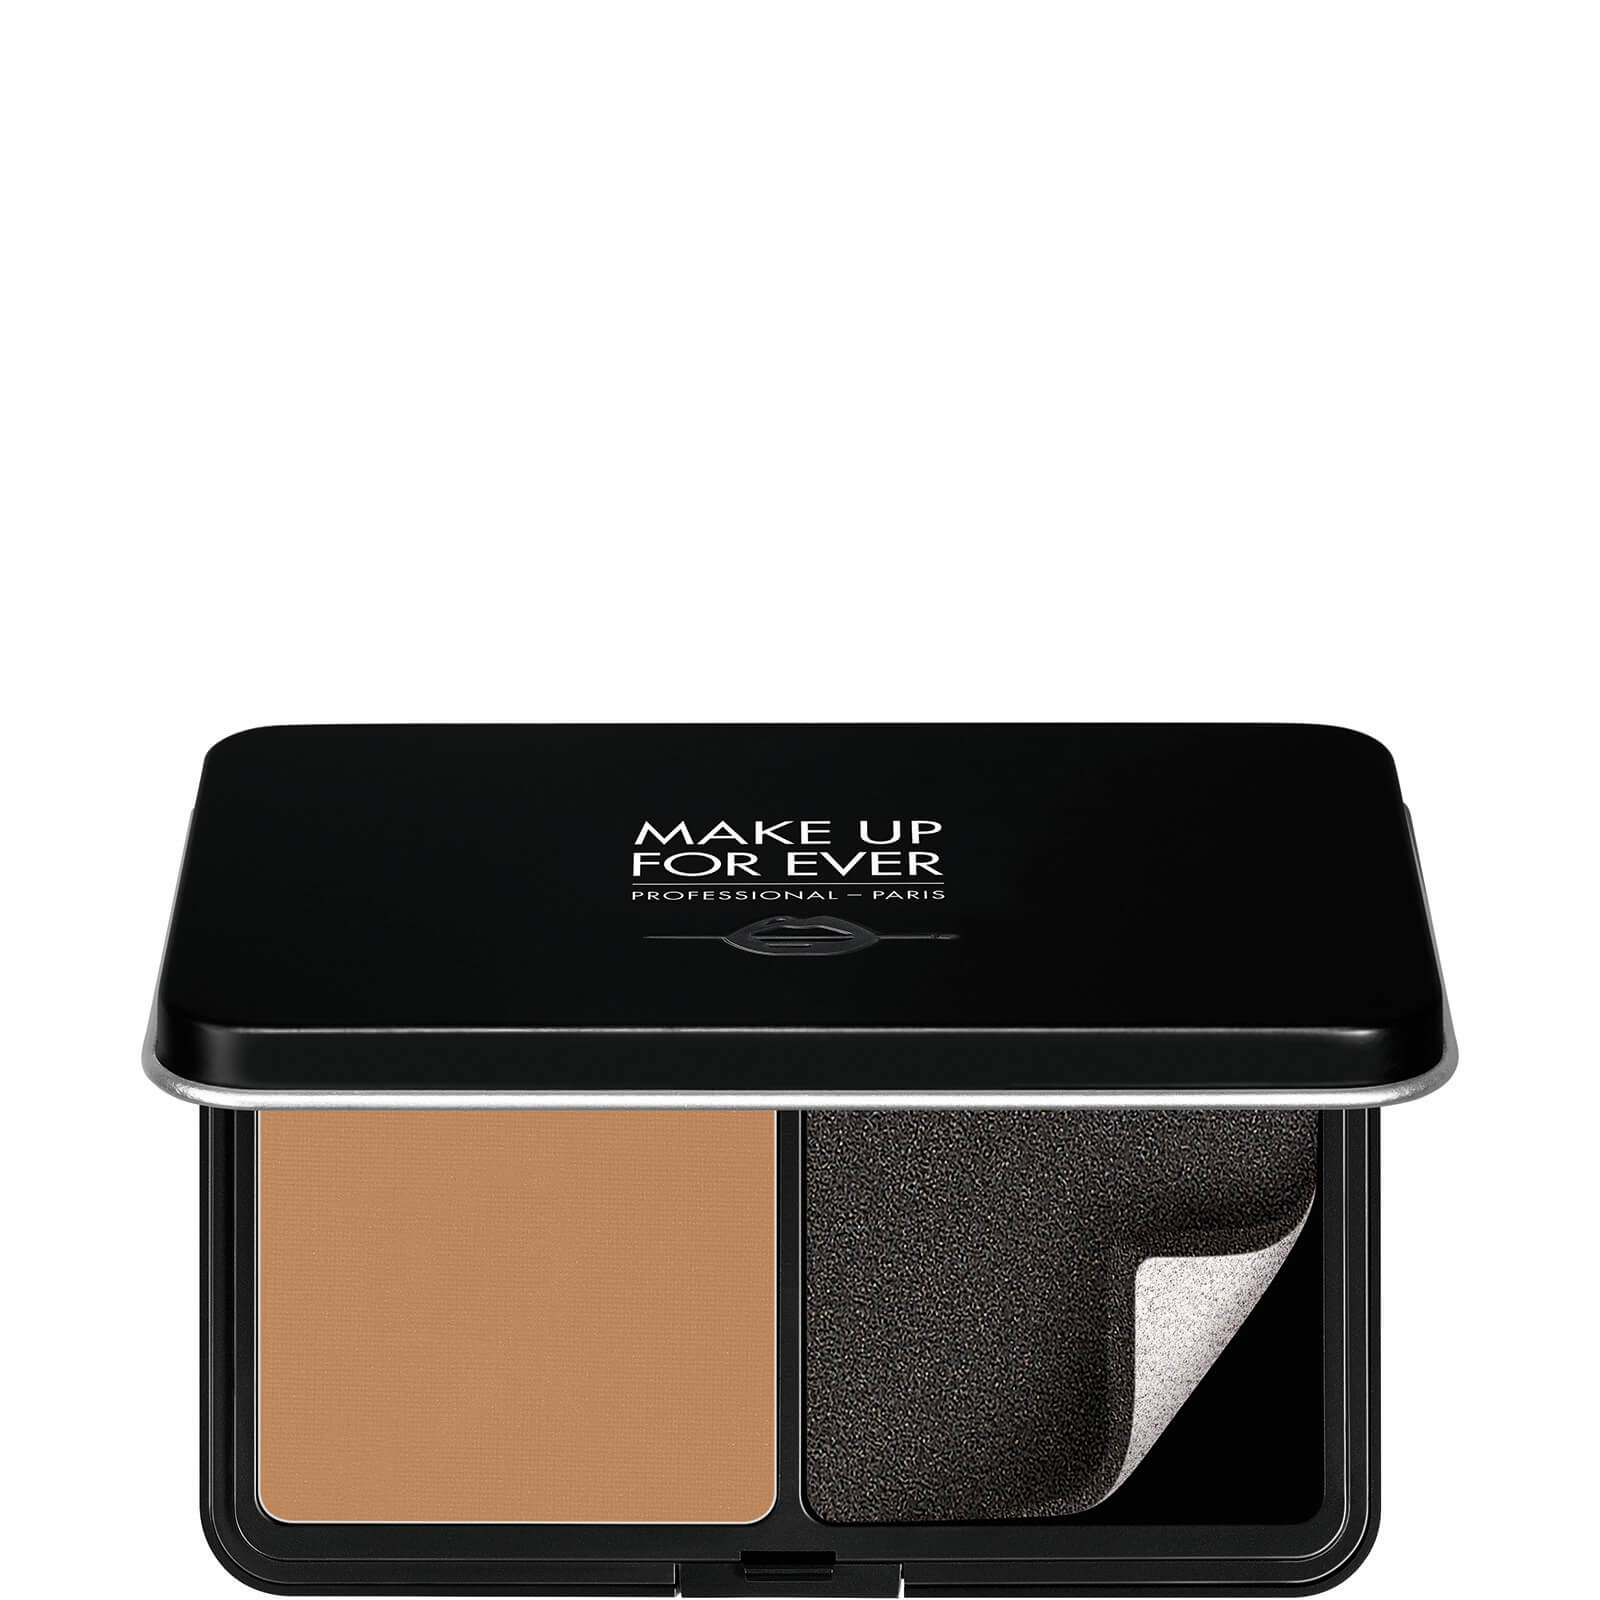 MAKE UP FOR EVER matte Velvet Skin Compact 11g (Various Shades) - - Y415 Almond